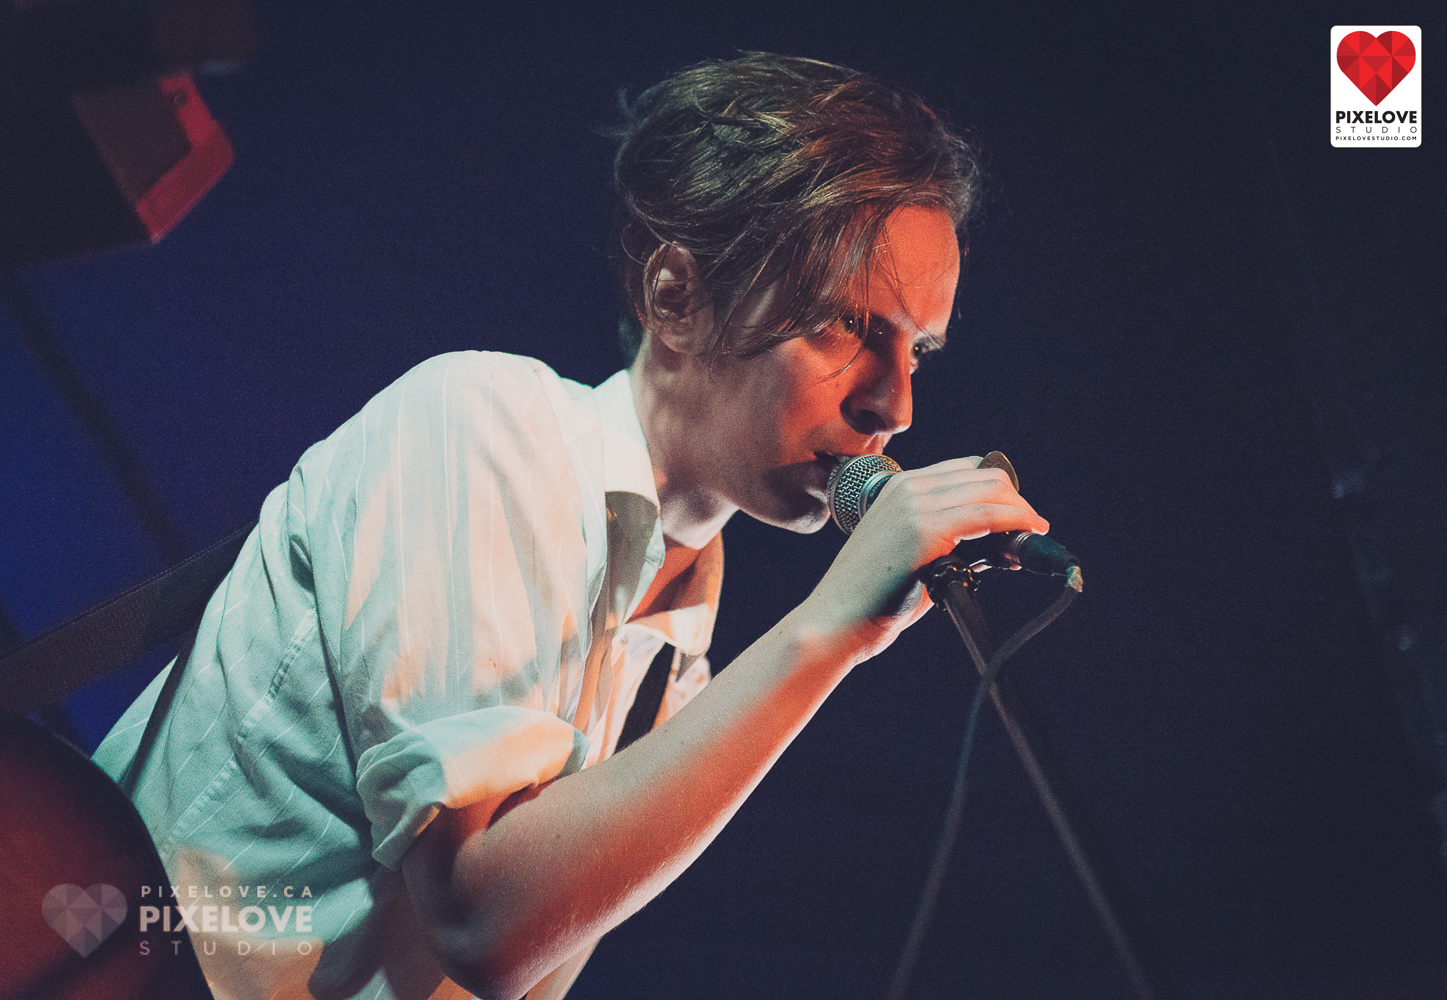 The Zolas performed at Divan Orange in Montreal. Photography by Pixelove Studio in Montreal, Canada.